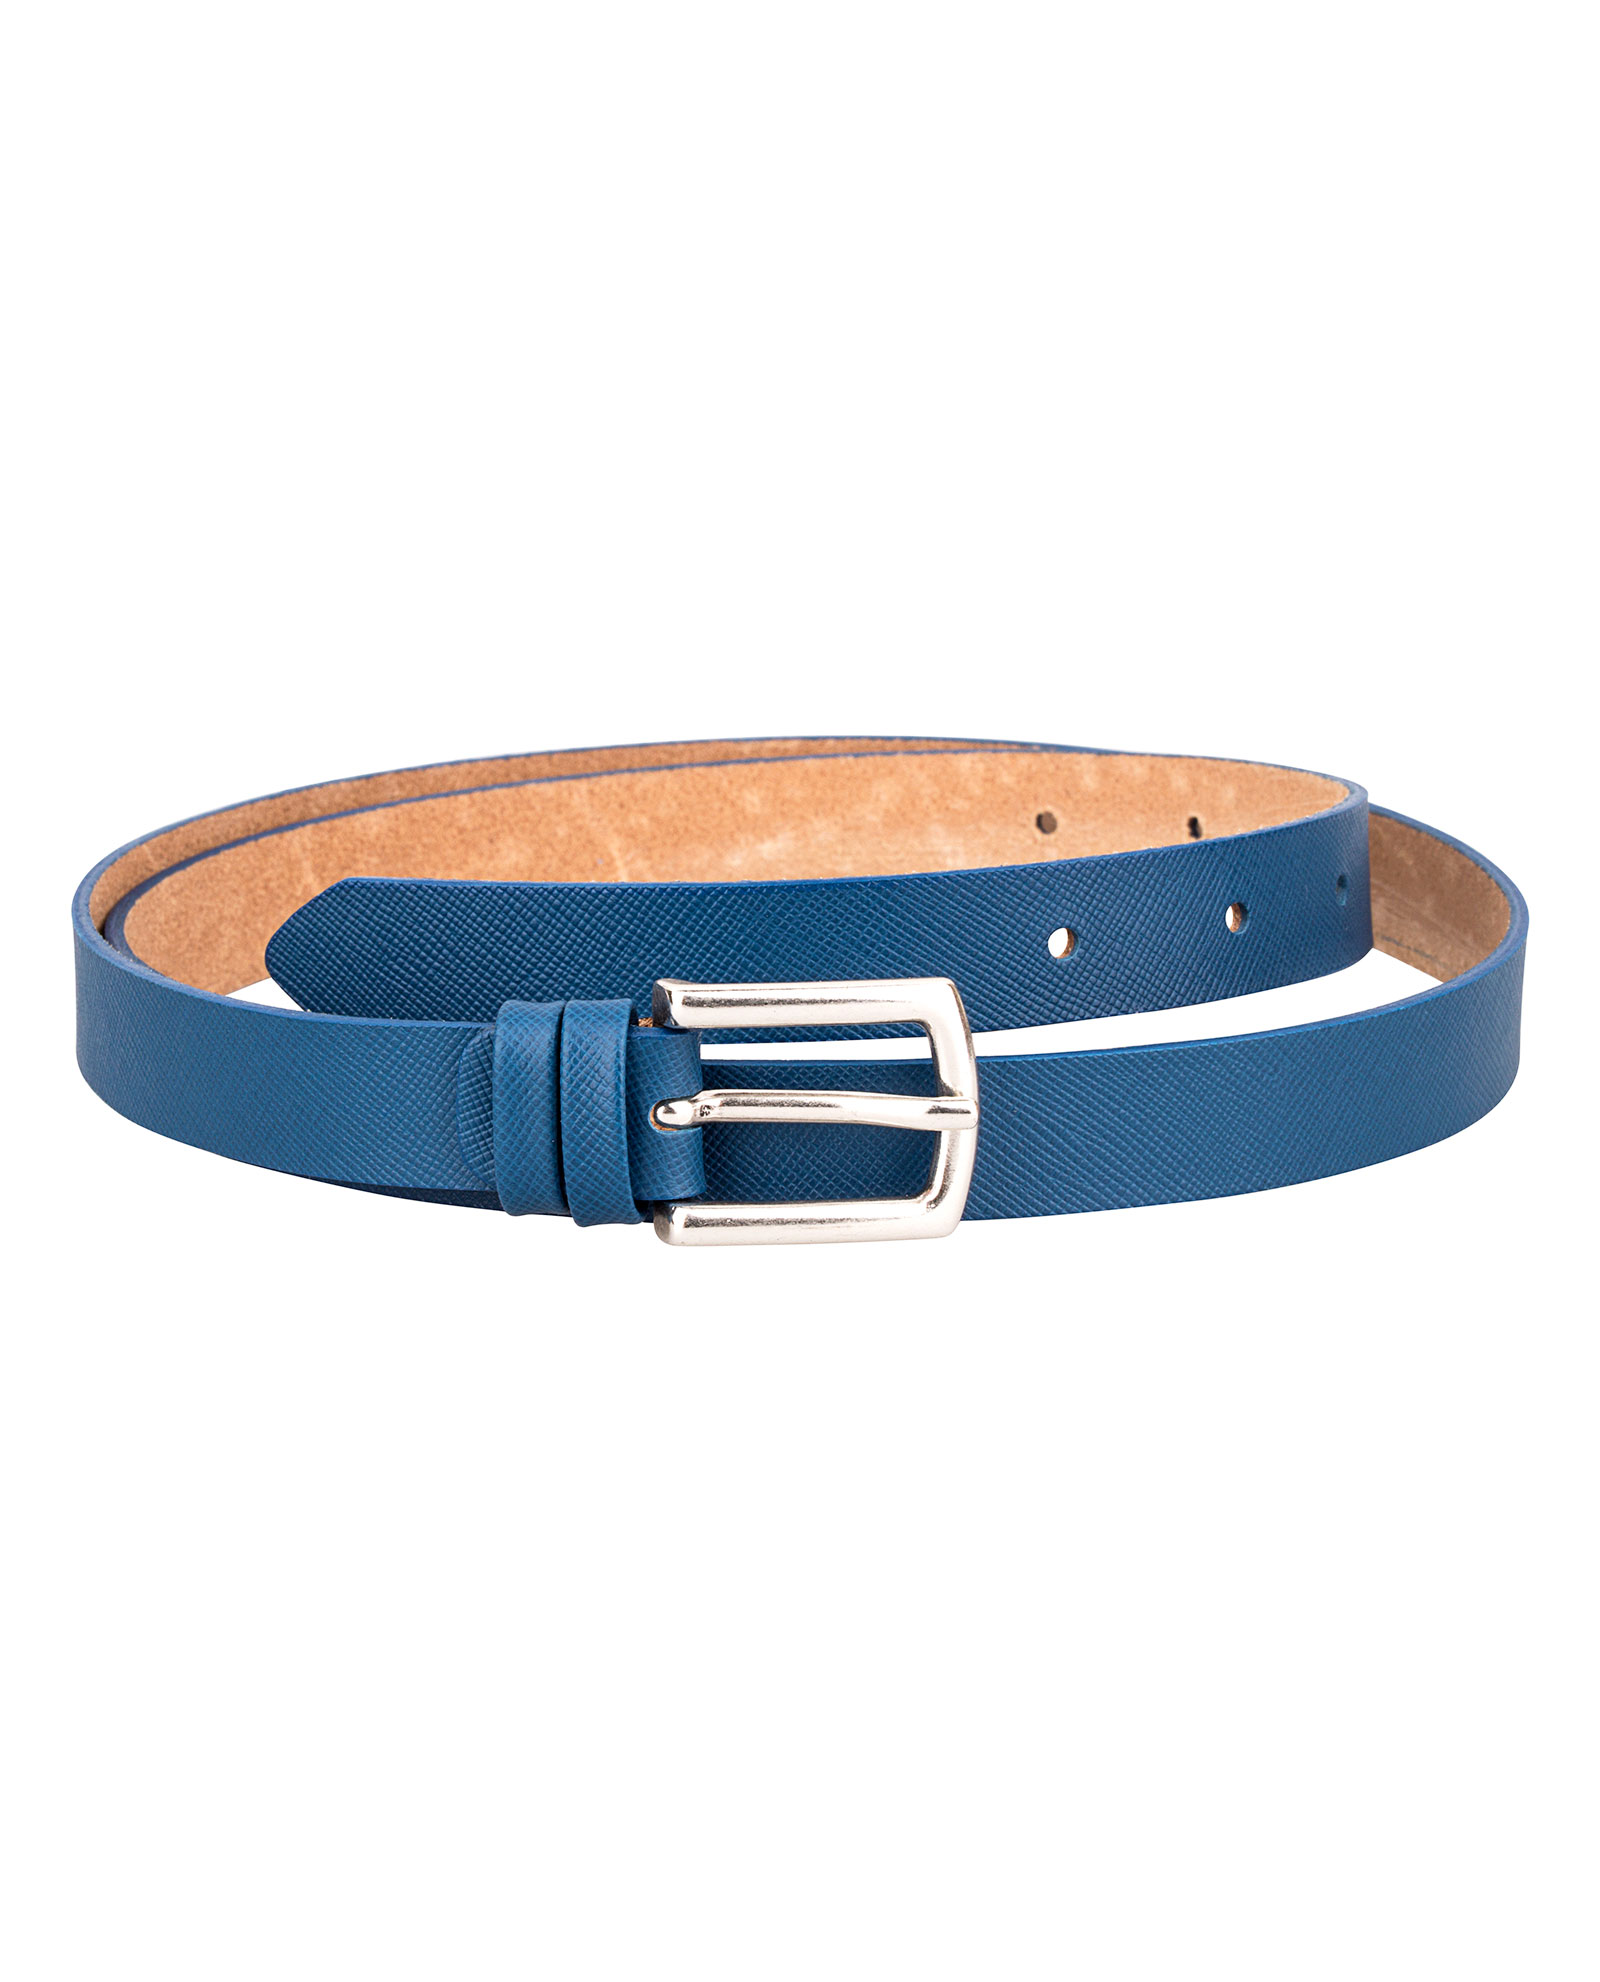 Buy Saffiano Leather Belt for Women - Thin Skinny - Free Shipping